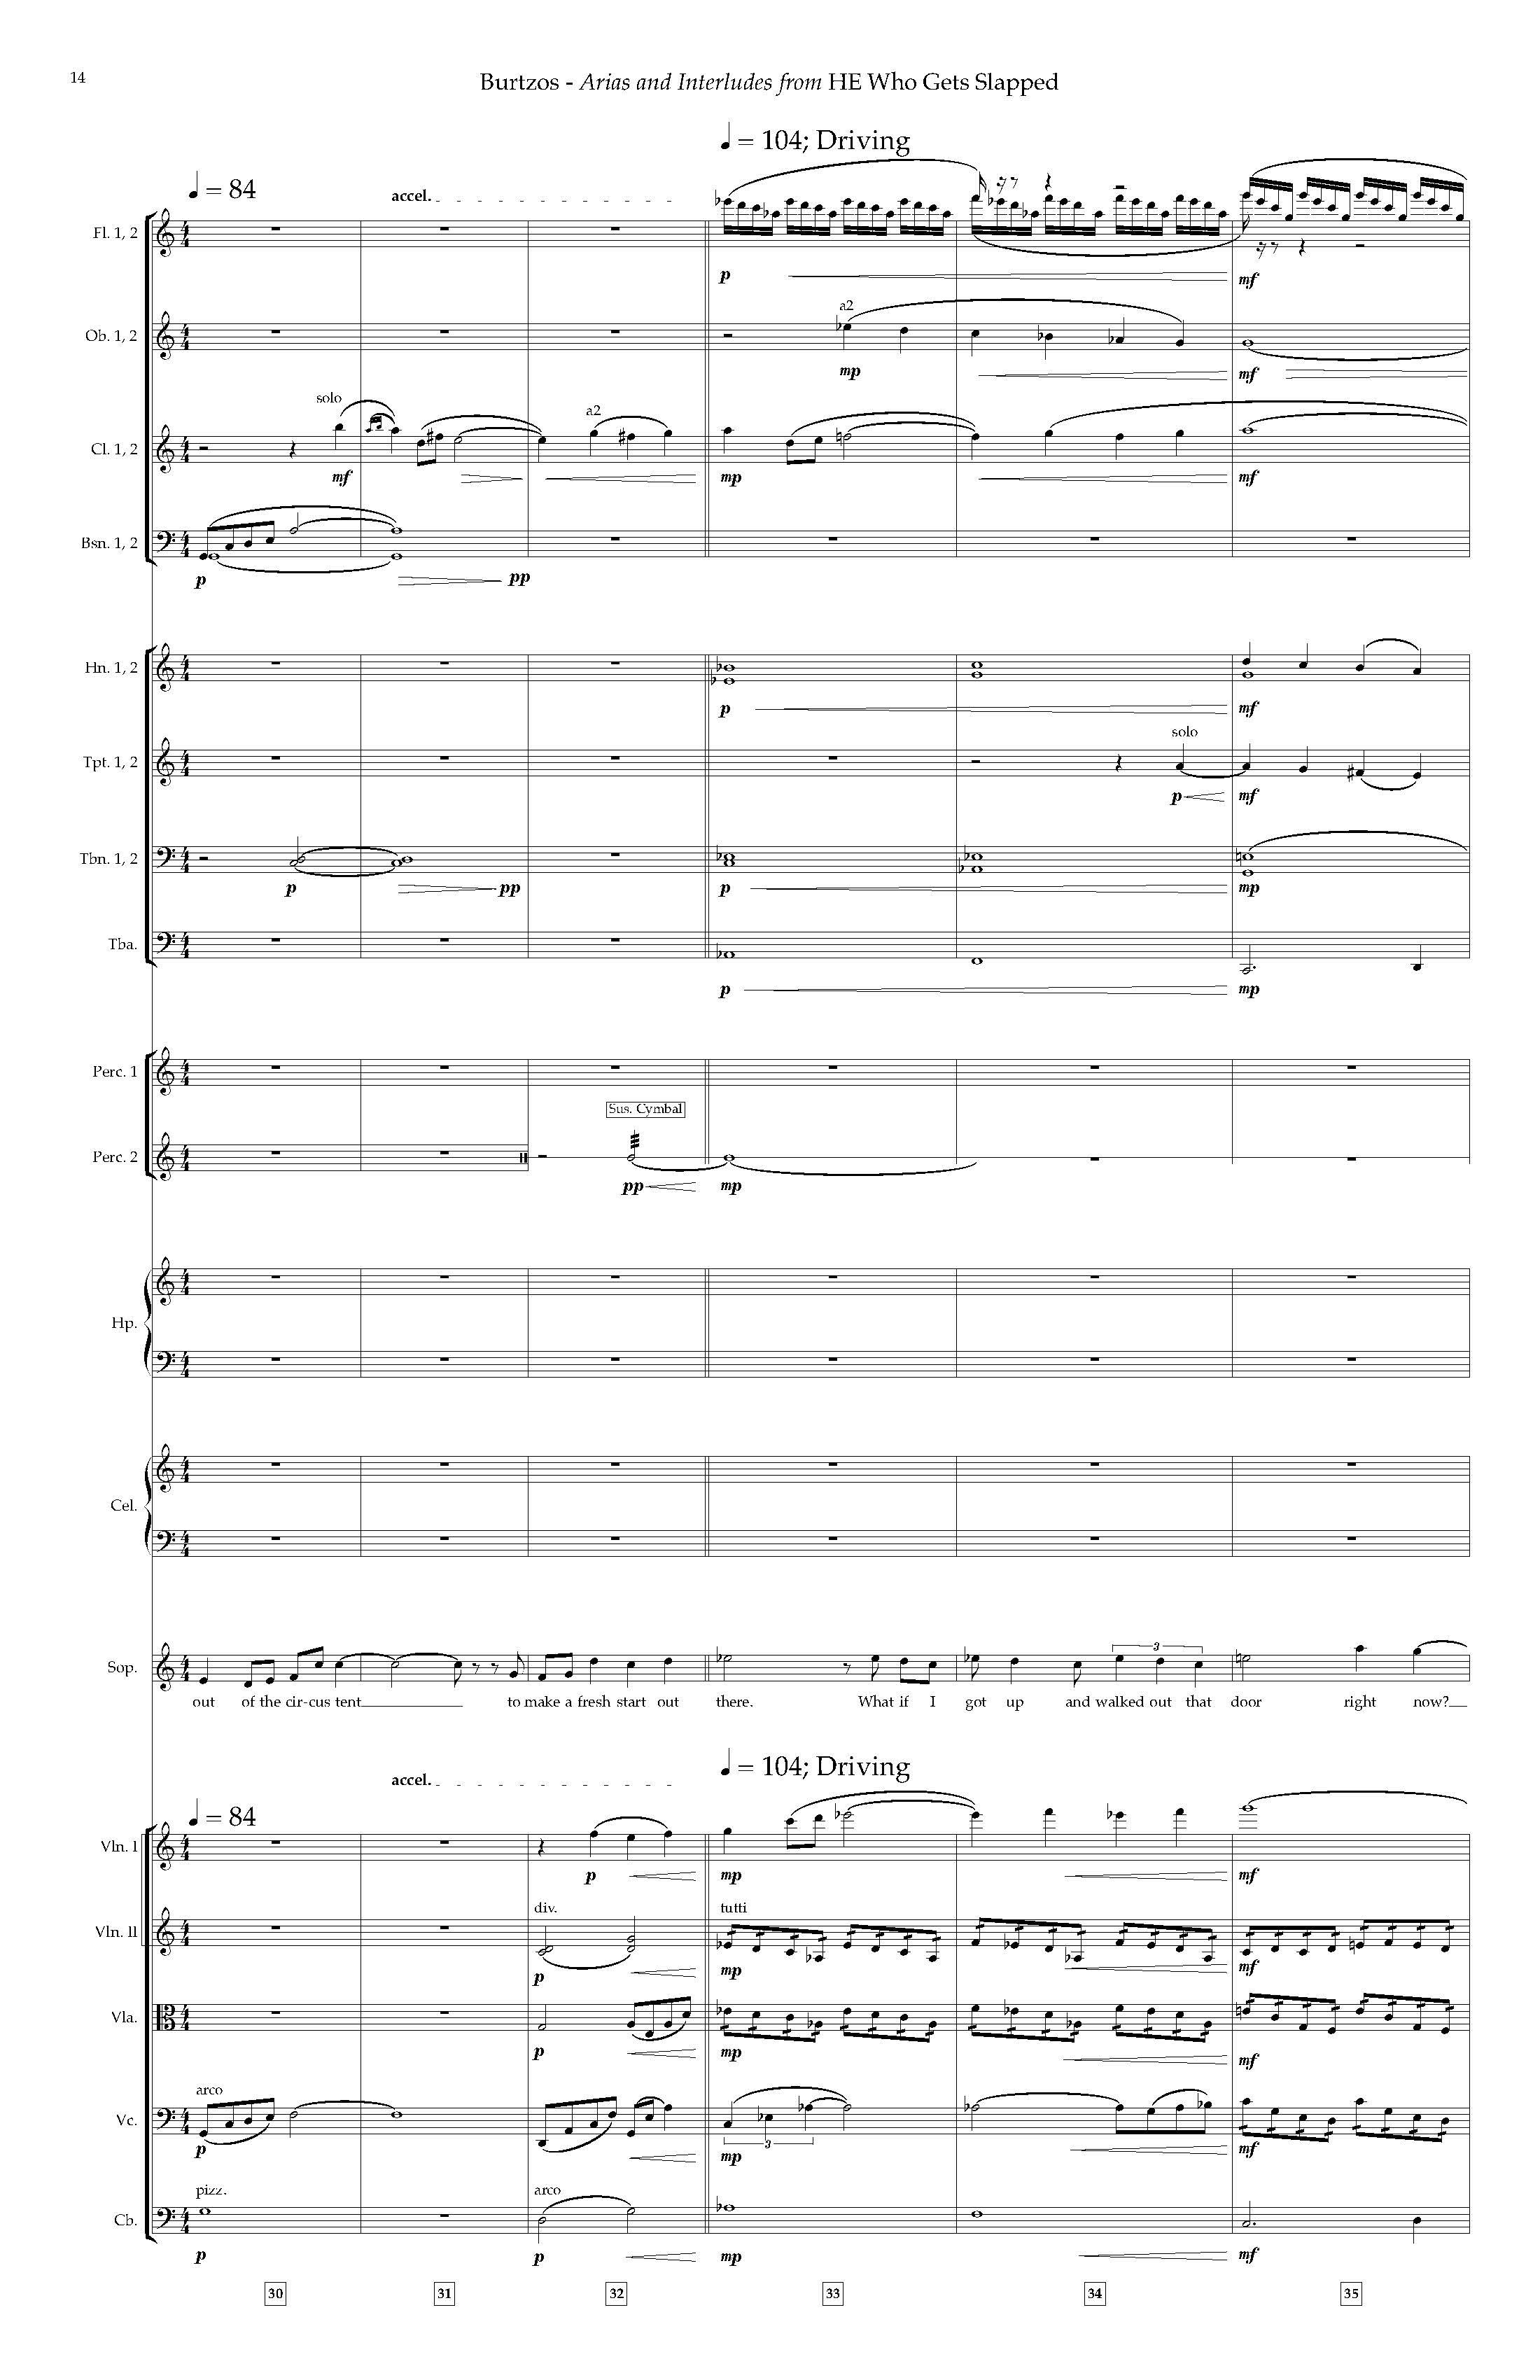 Arias and Interludes from HWGS - Complete Score_Page_20.jpg